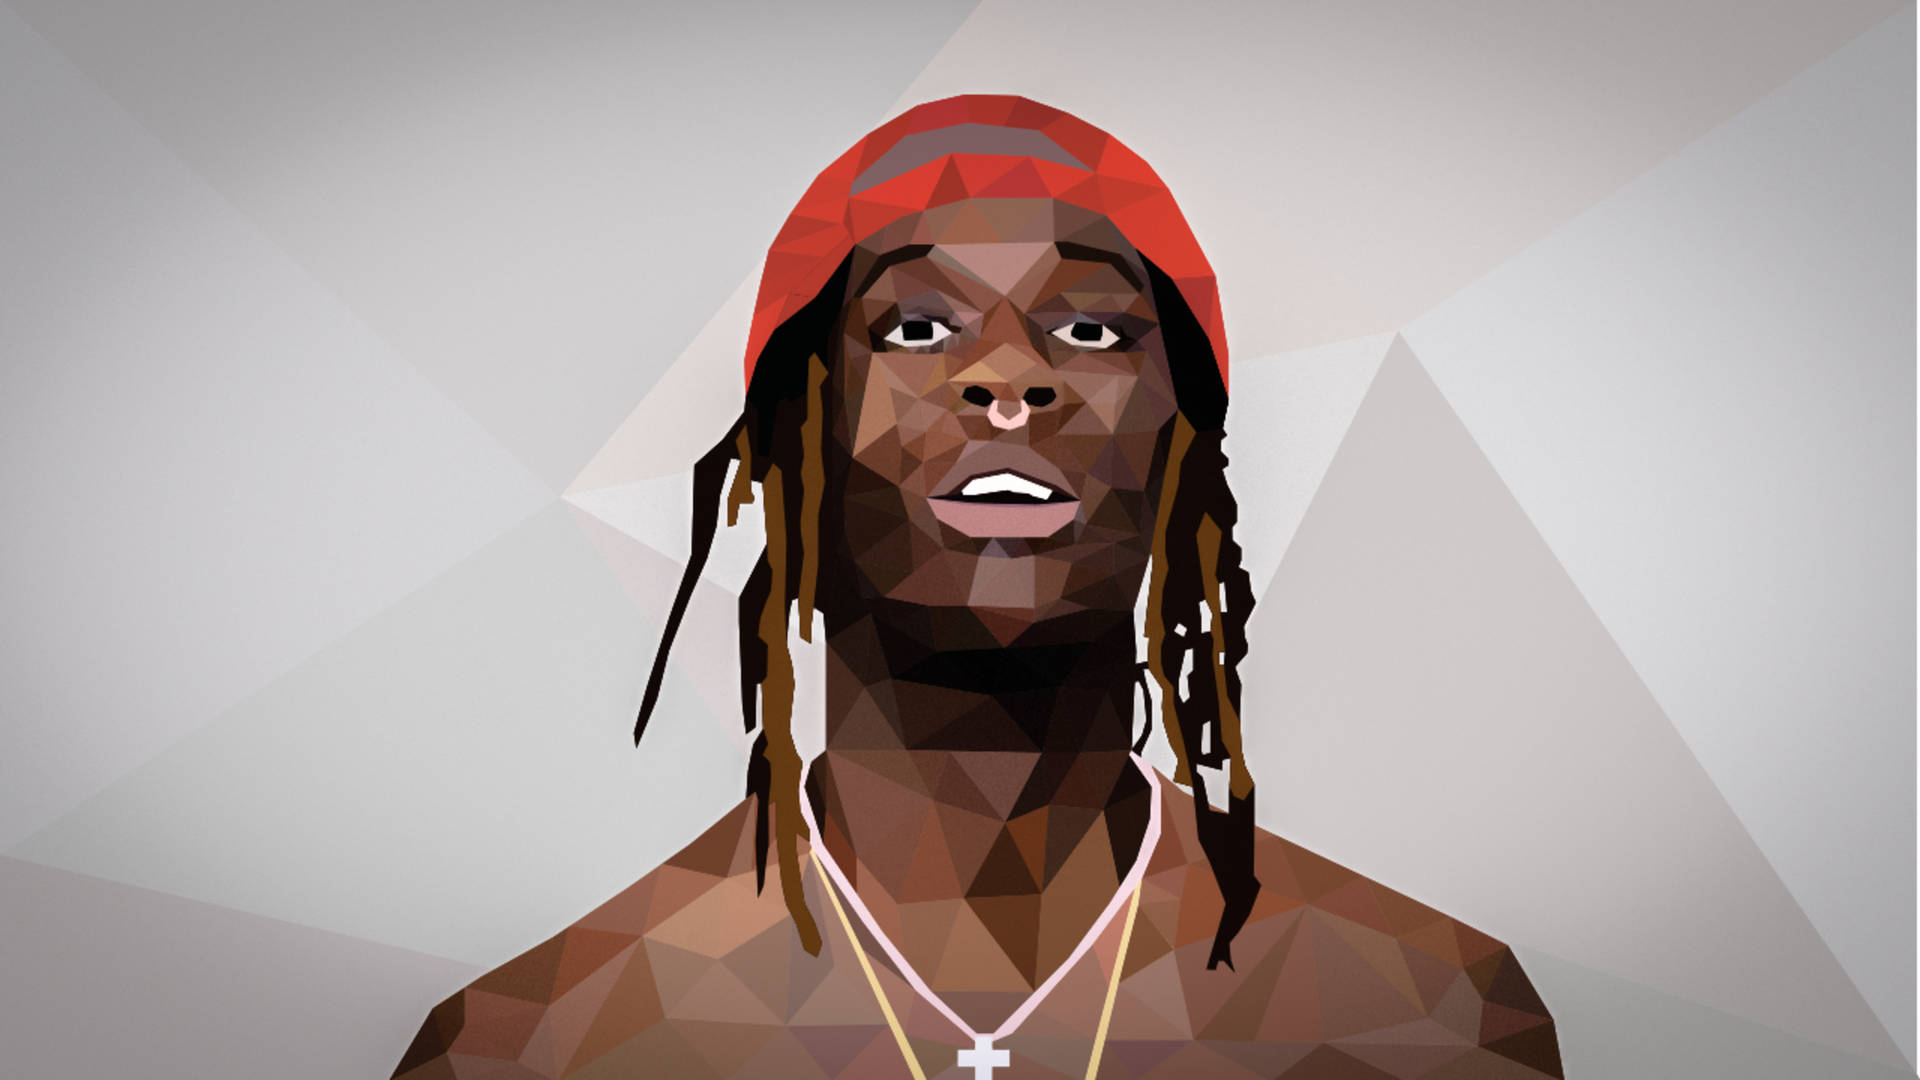 Join Young Thug on a musical journey through a vibrant and abstract world Wallpaper